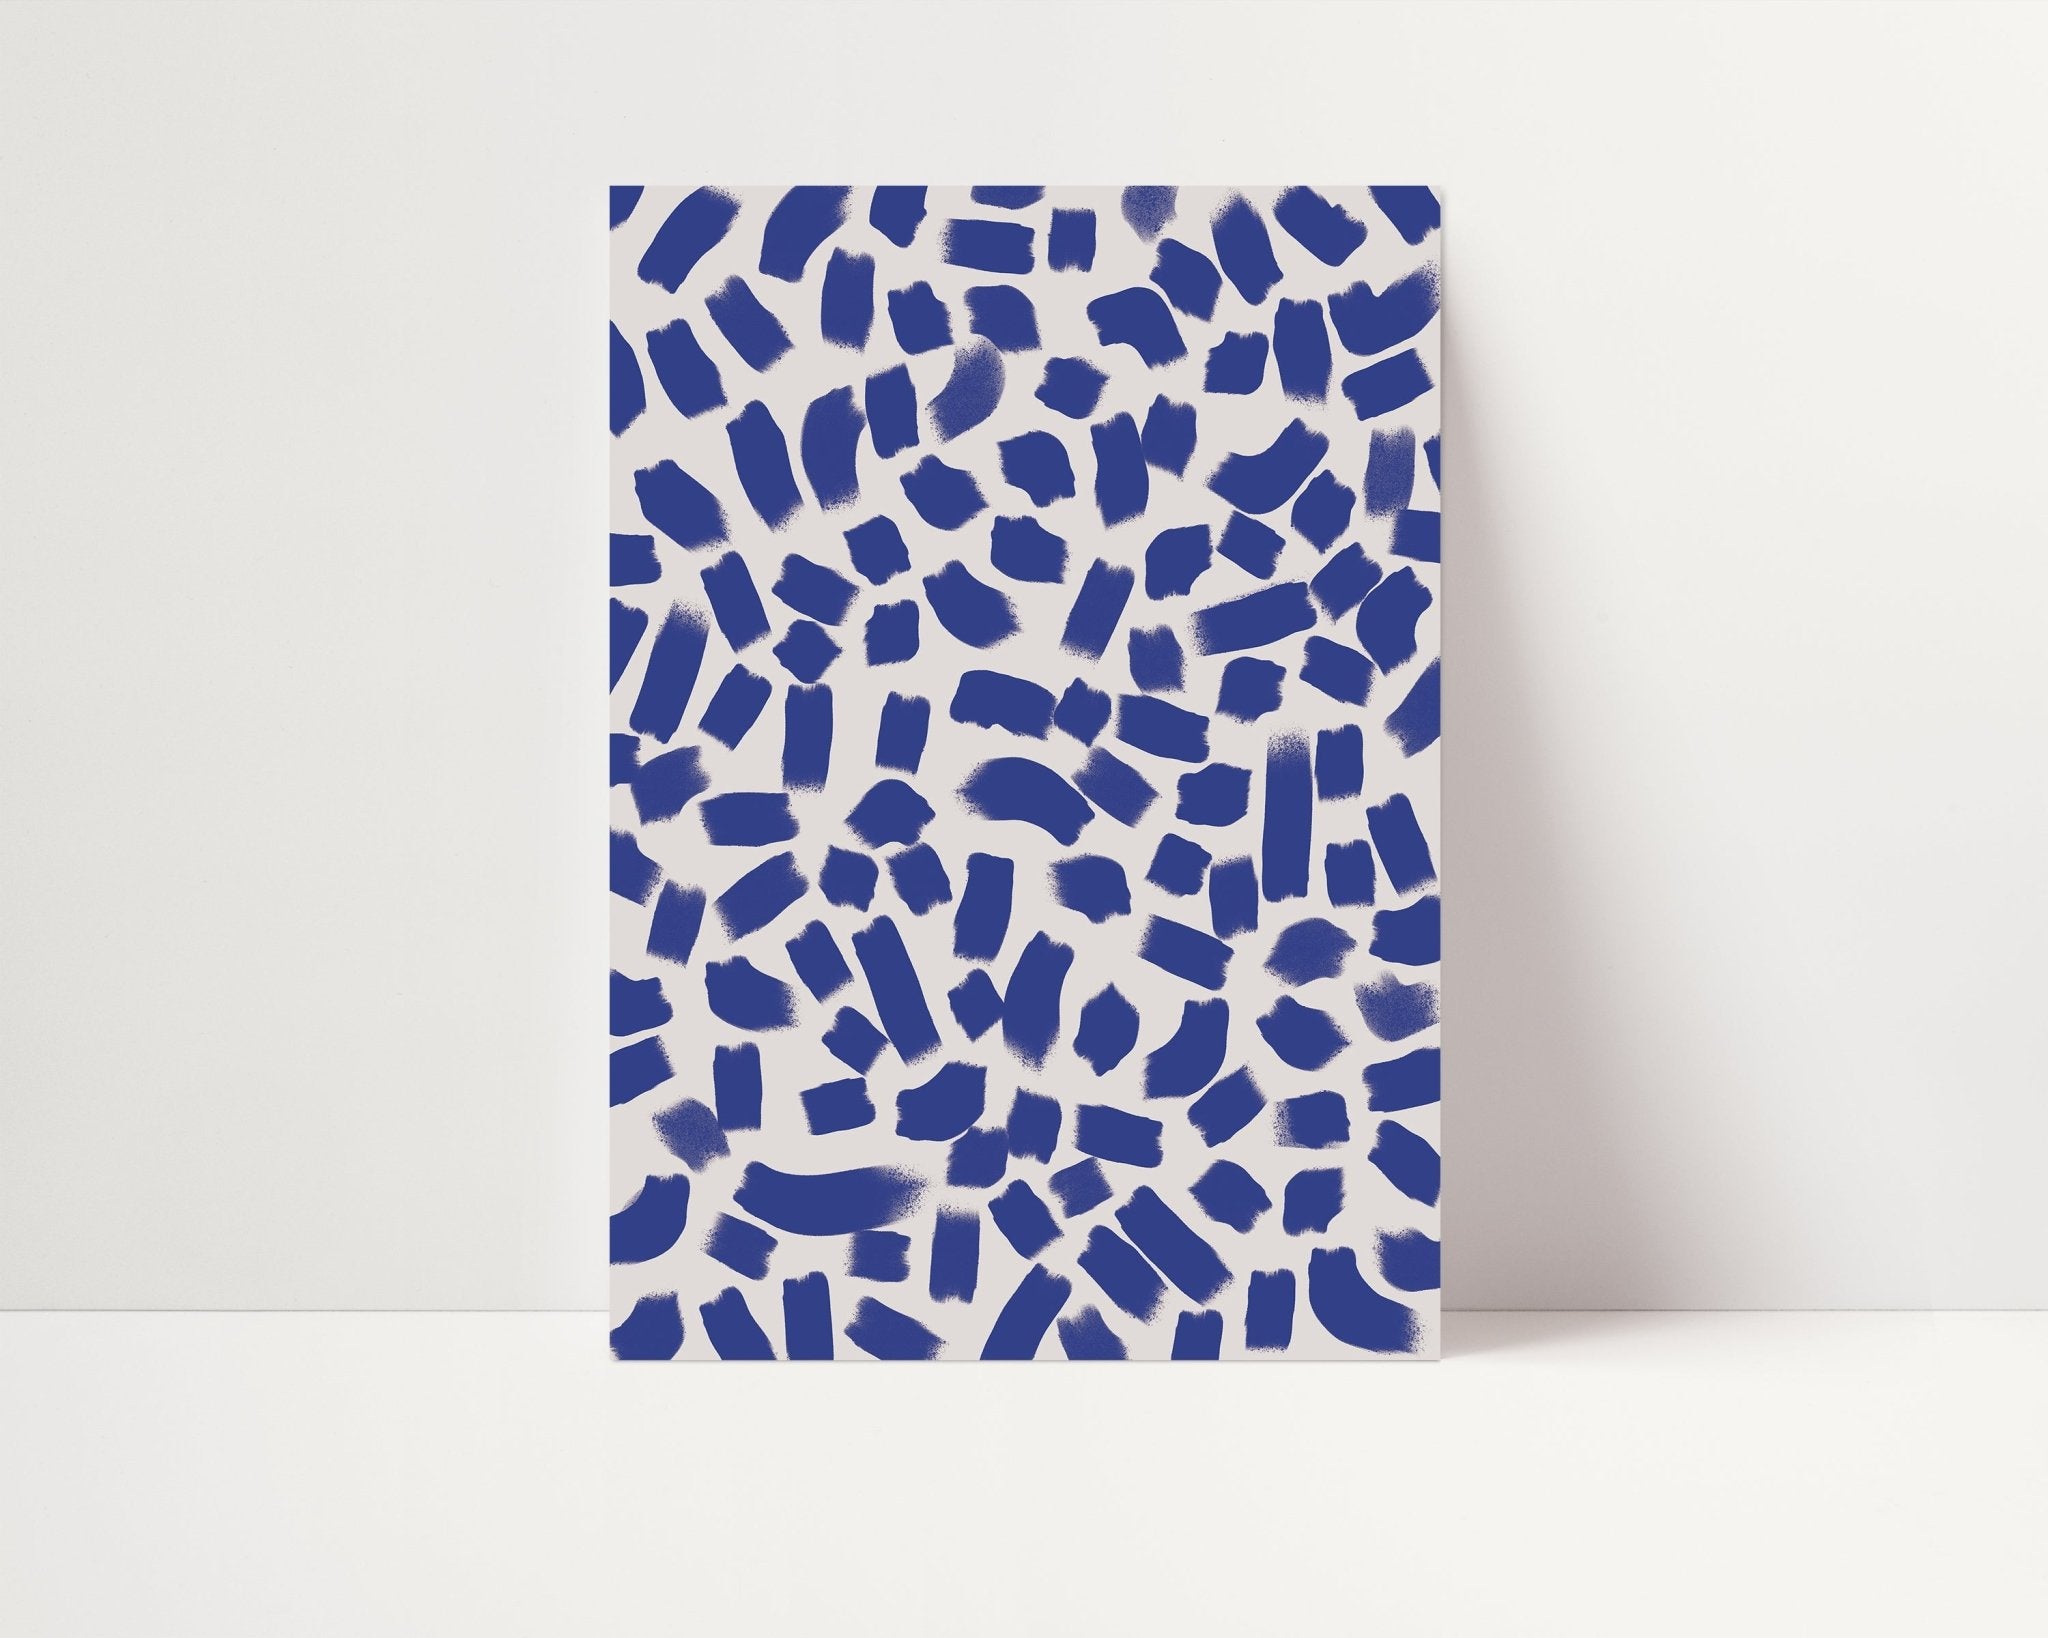 Painted Mosaic Poster - D'Luxe Prints